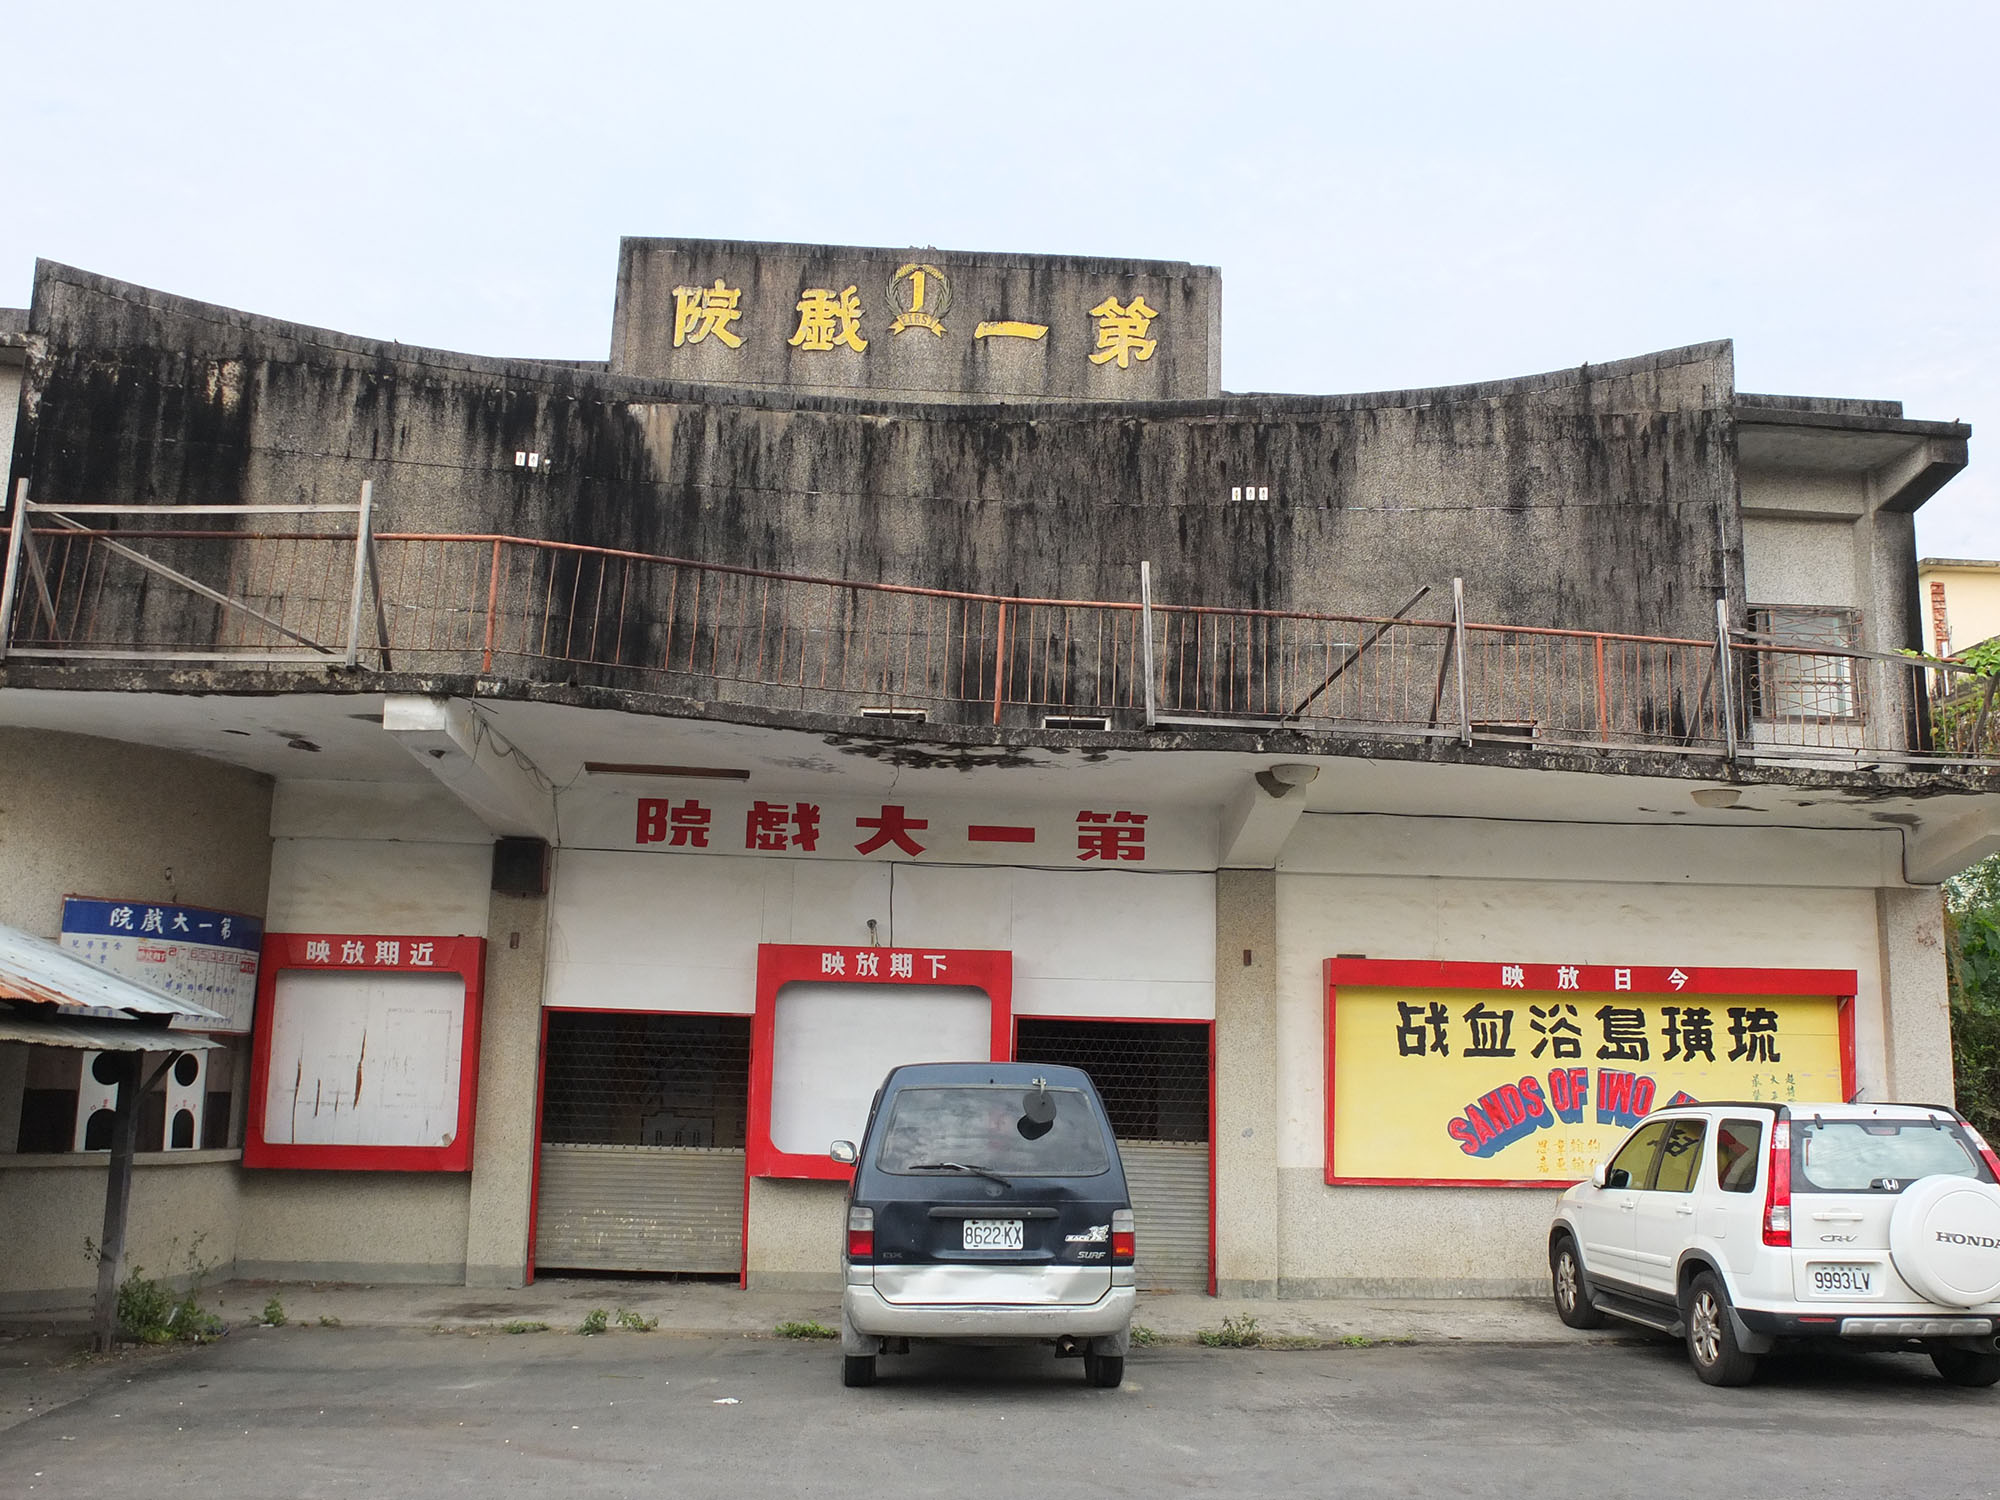 The well-preserved appearance of the closed Meinong First Theater